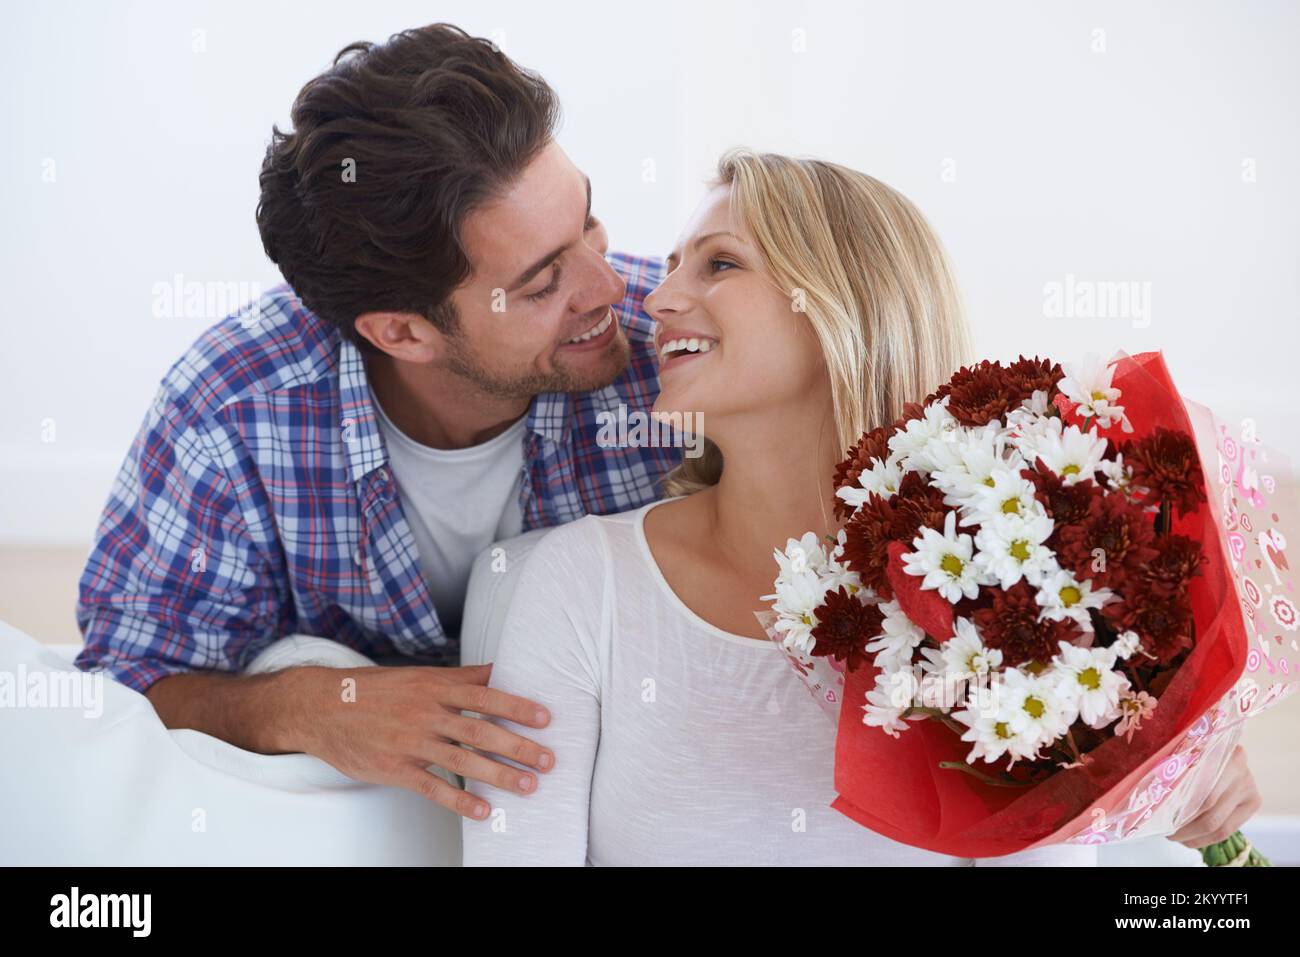 For my love. a man suprsing his partner with flowers at home. Stock Photo